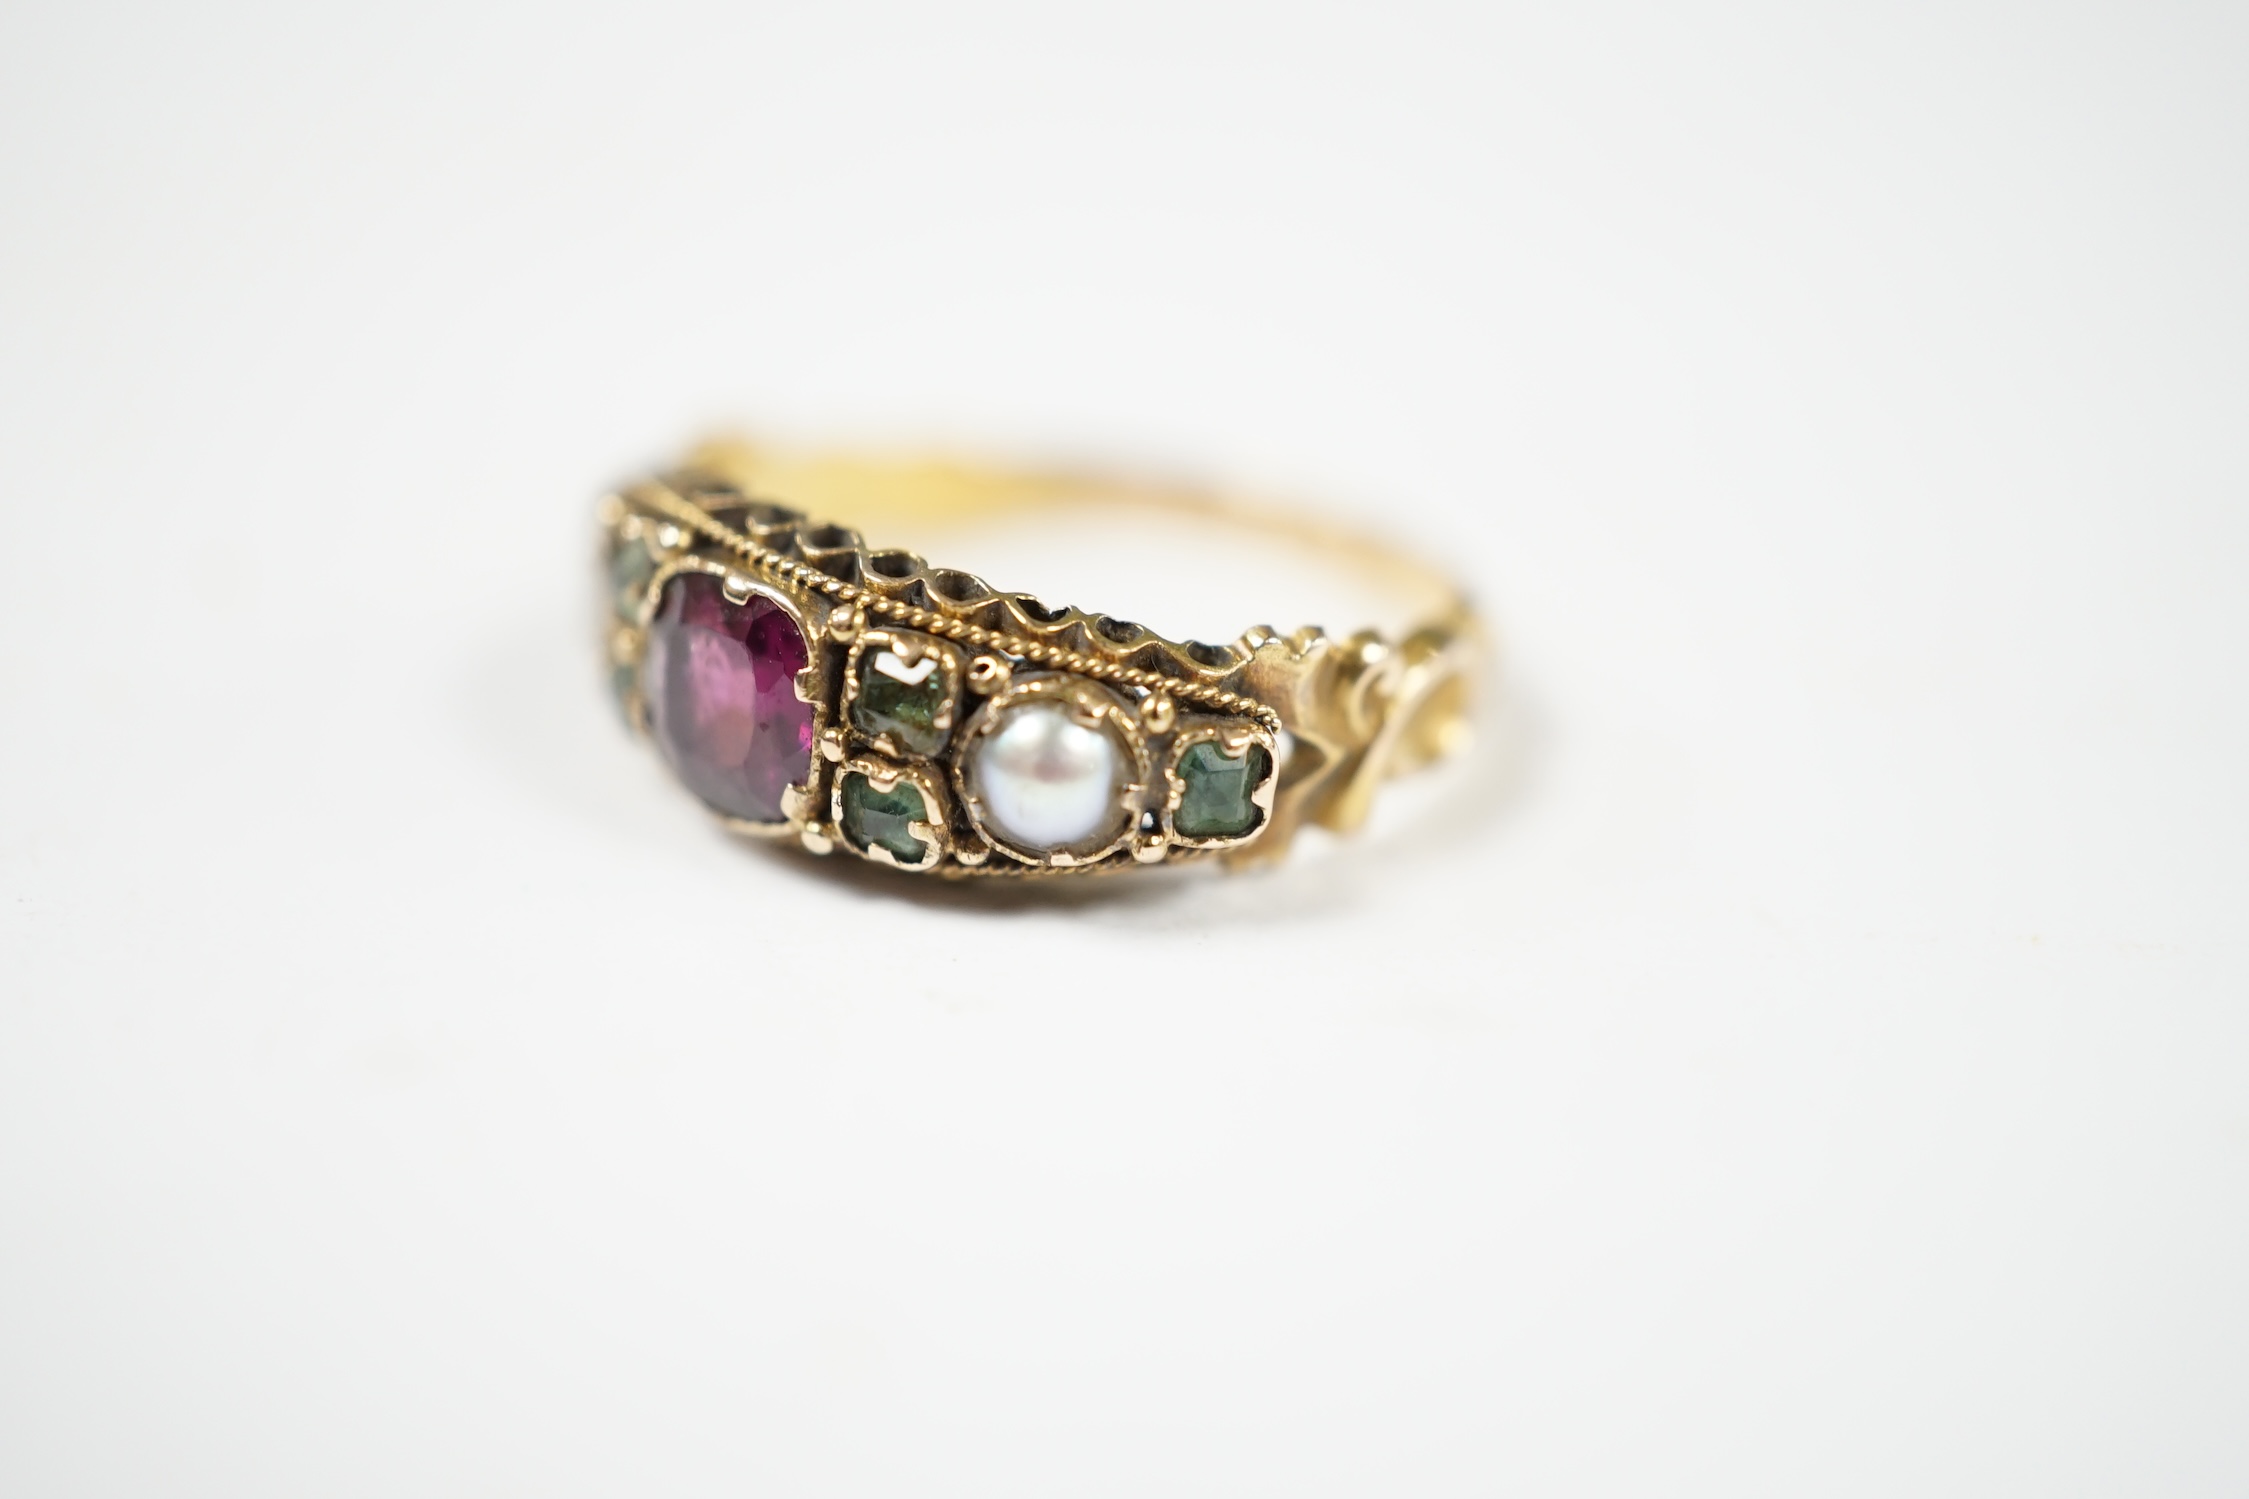 A late Victorian 15ct gold, garnet, emerald and seed pearl cluster set dress ring, in the Suffragette colours, size L/M, gross weight 2.1 grams. Condition - fair to good